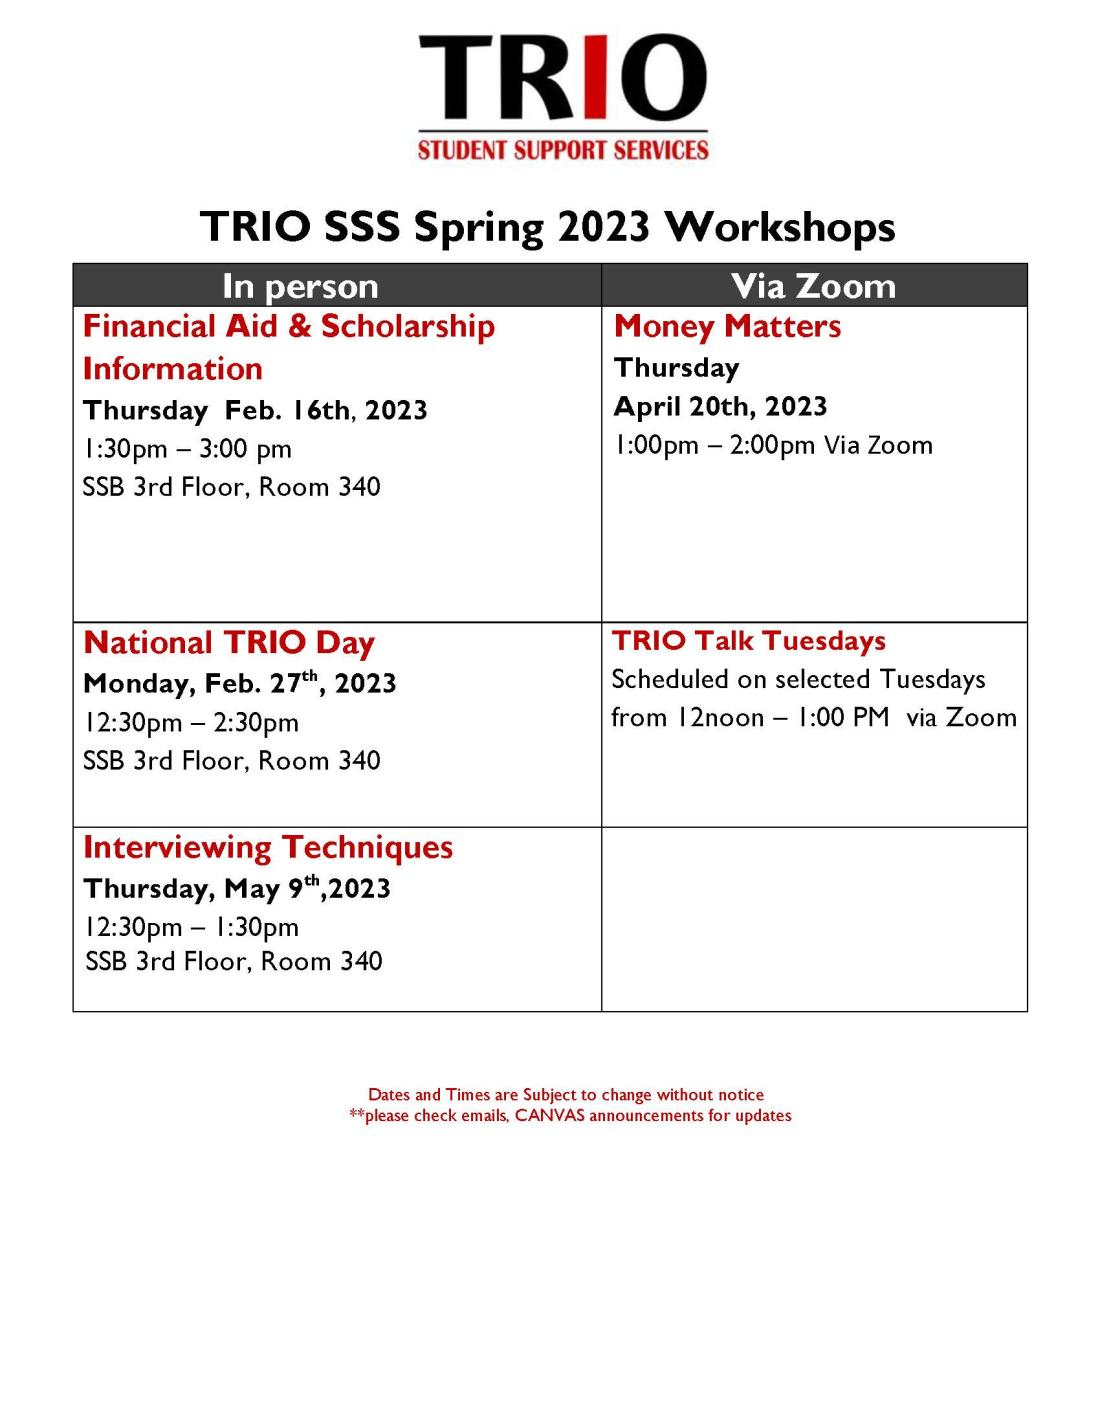 Two columns with information on topic, dates, times and location for Spring 2023 workshops